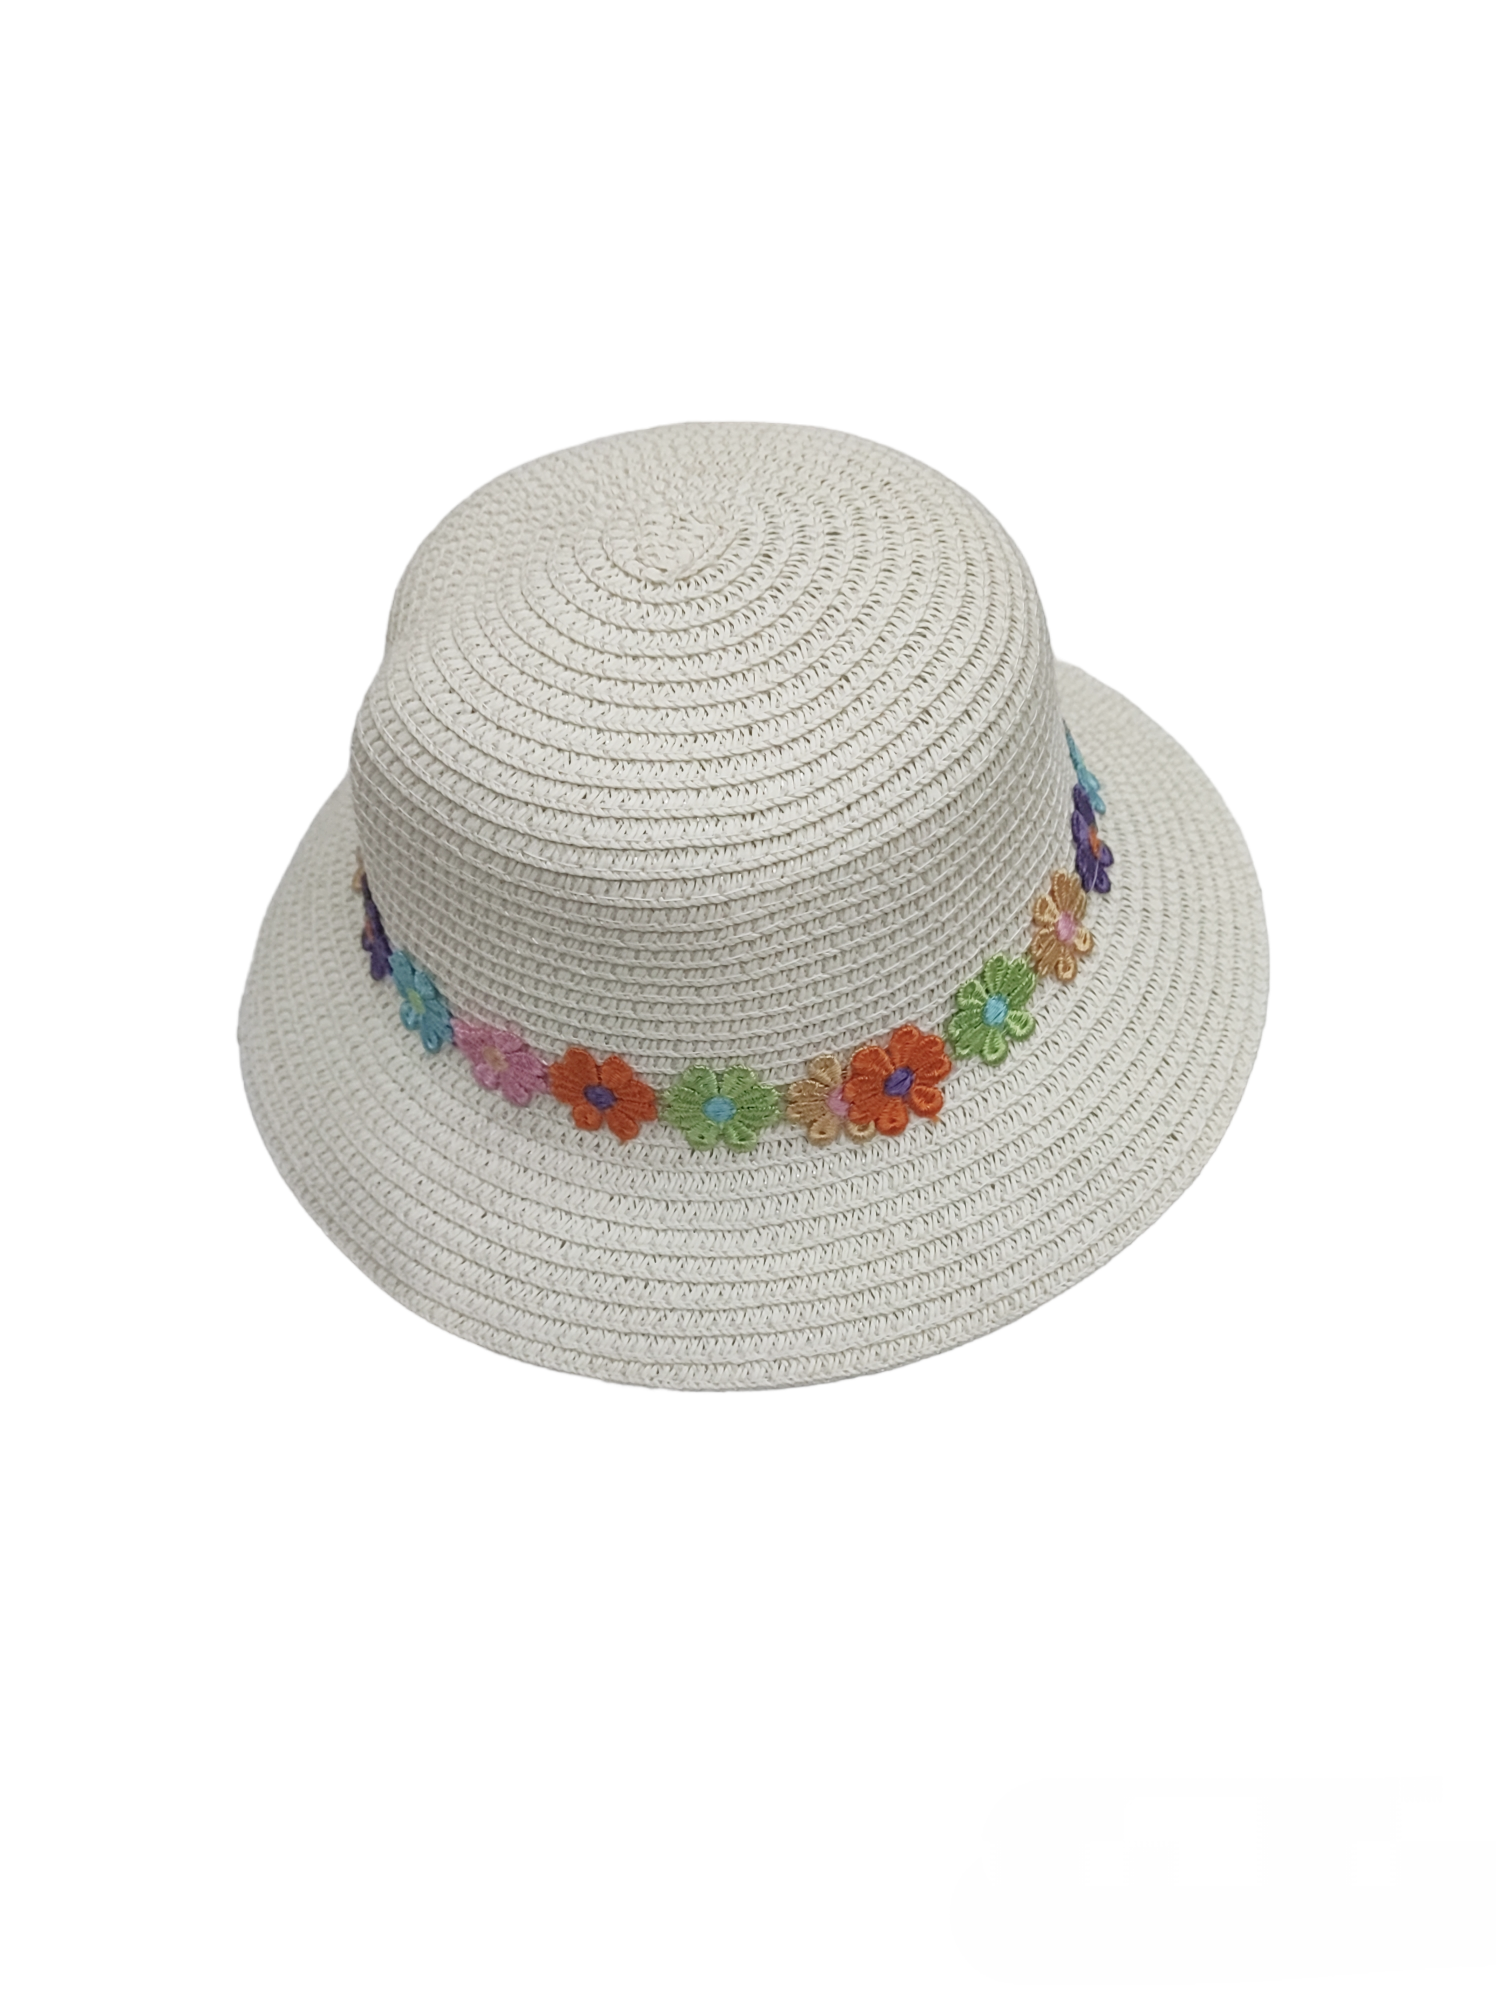 Child size straw hats with small flower pattern (x12)